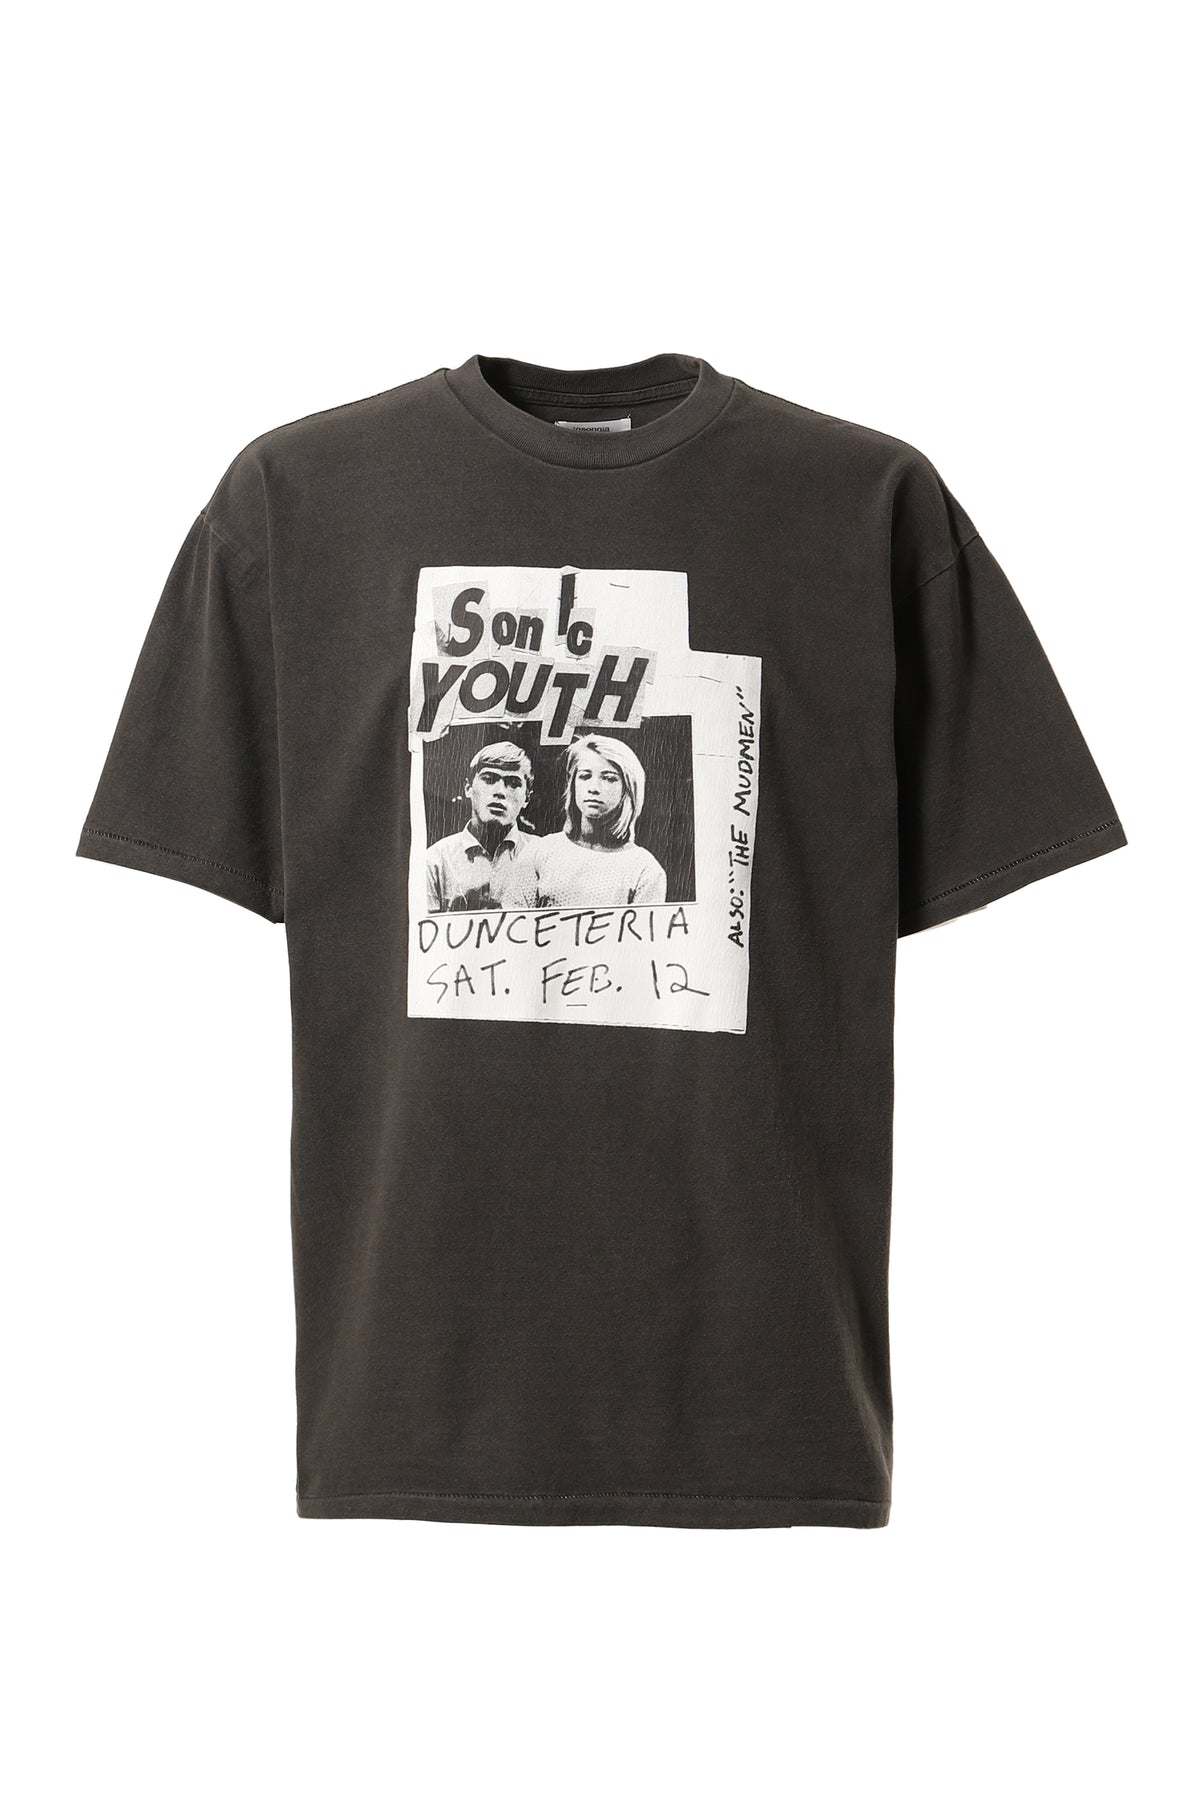 SONIC YOUTH DUNCETERIA TEE / BLK